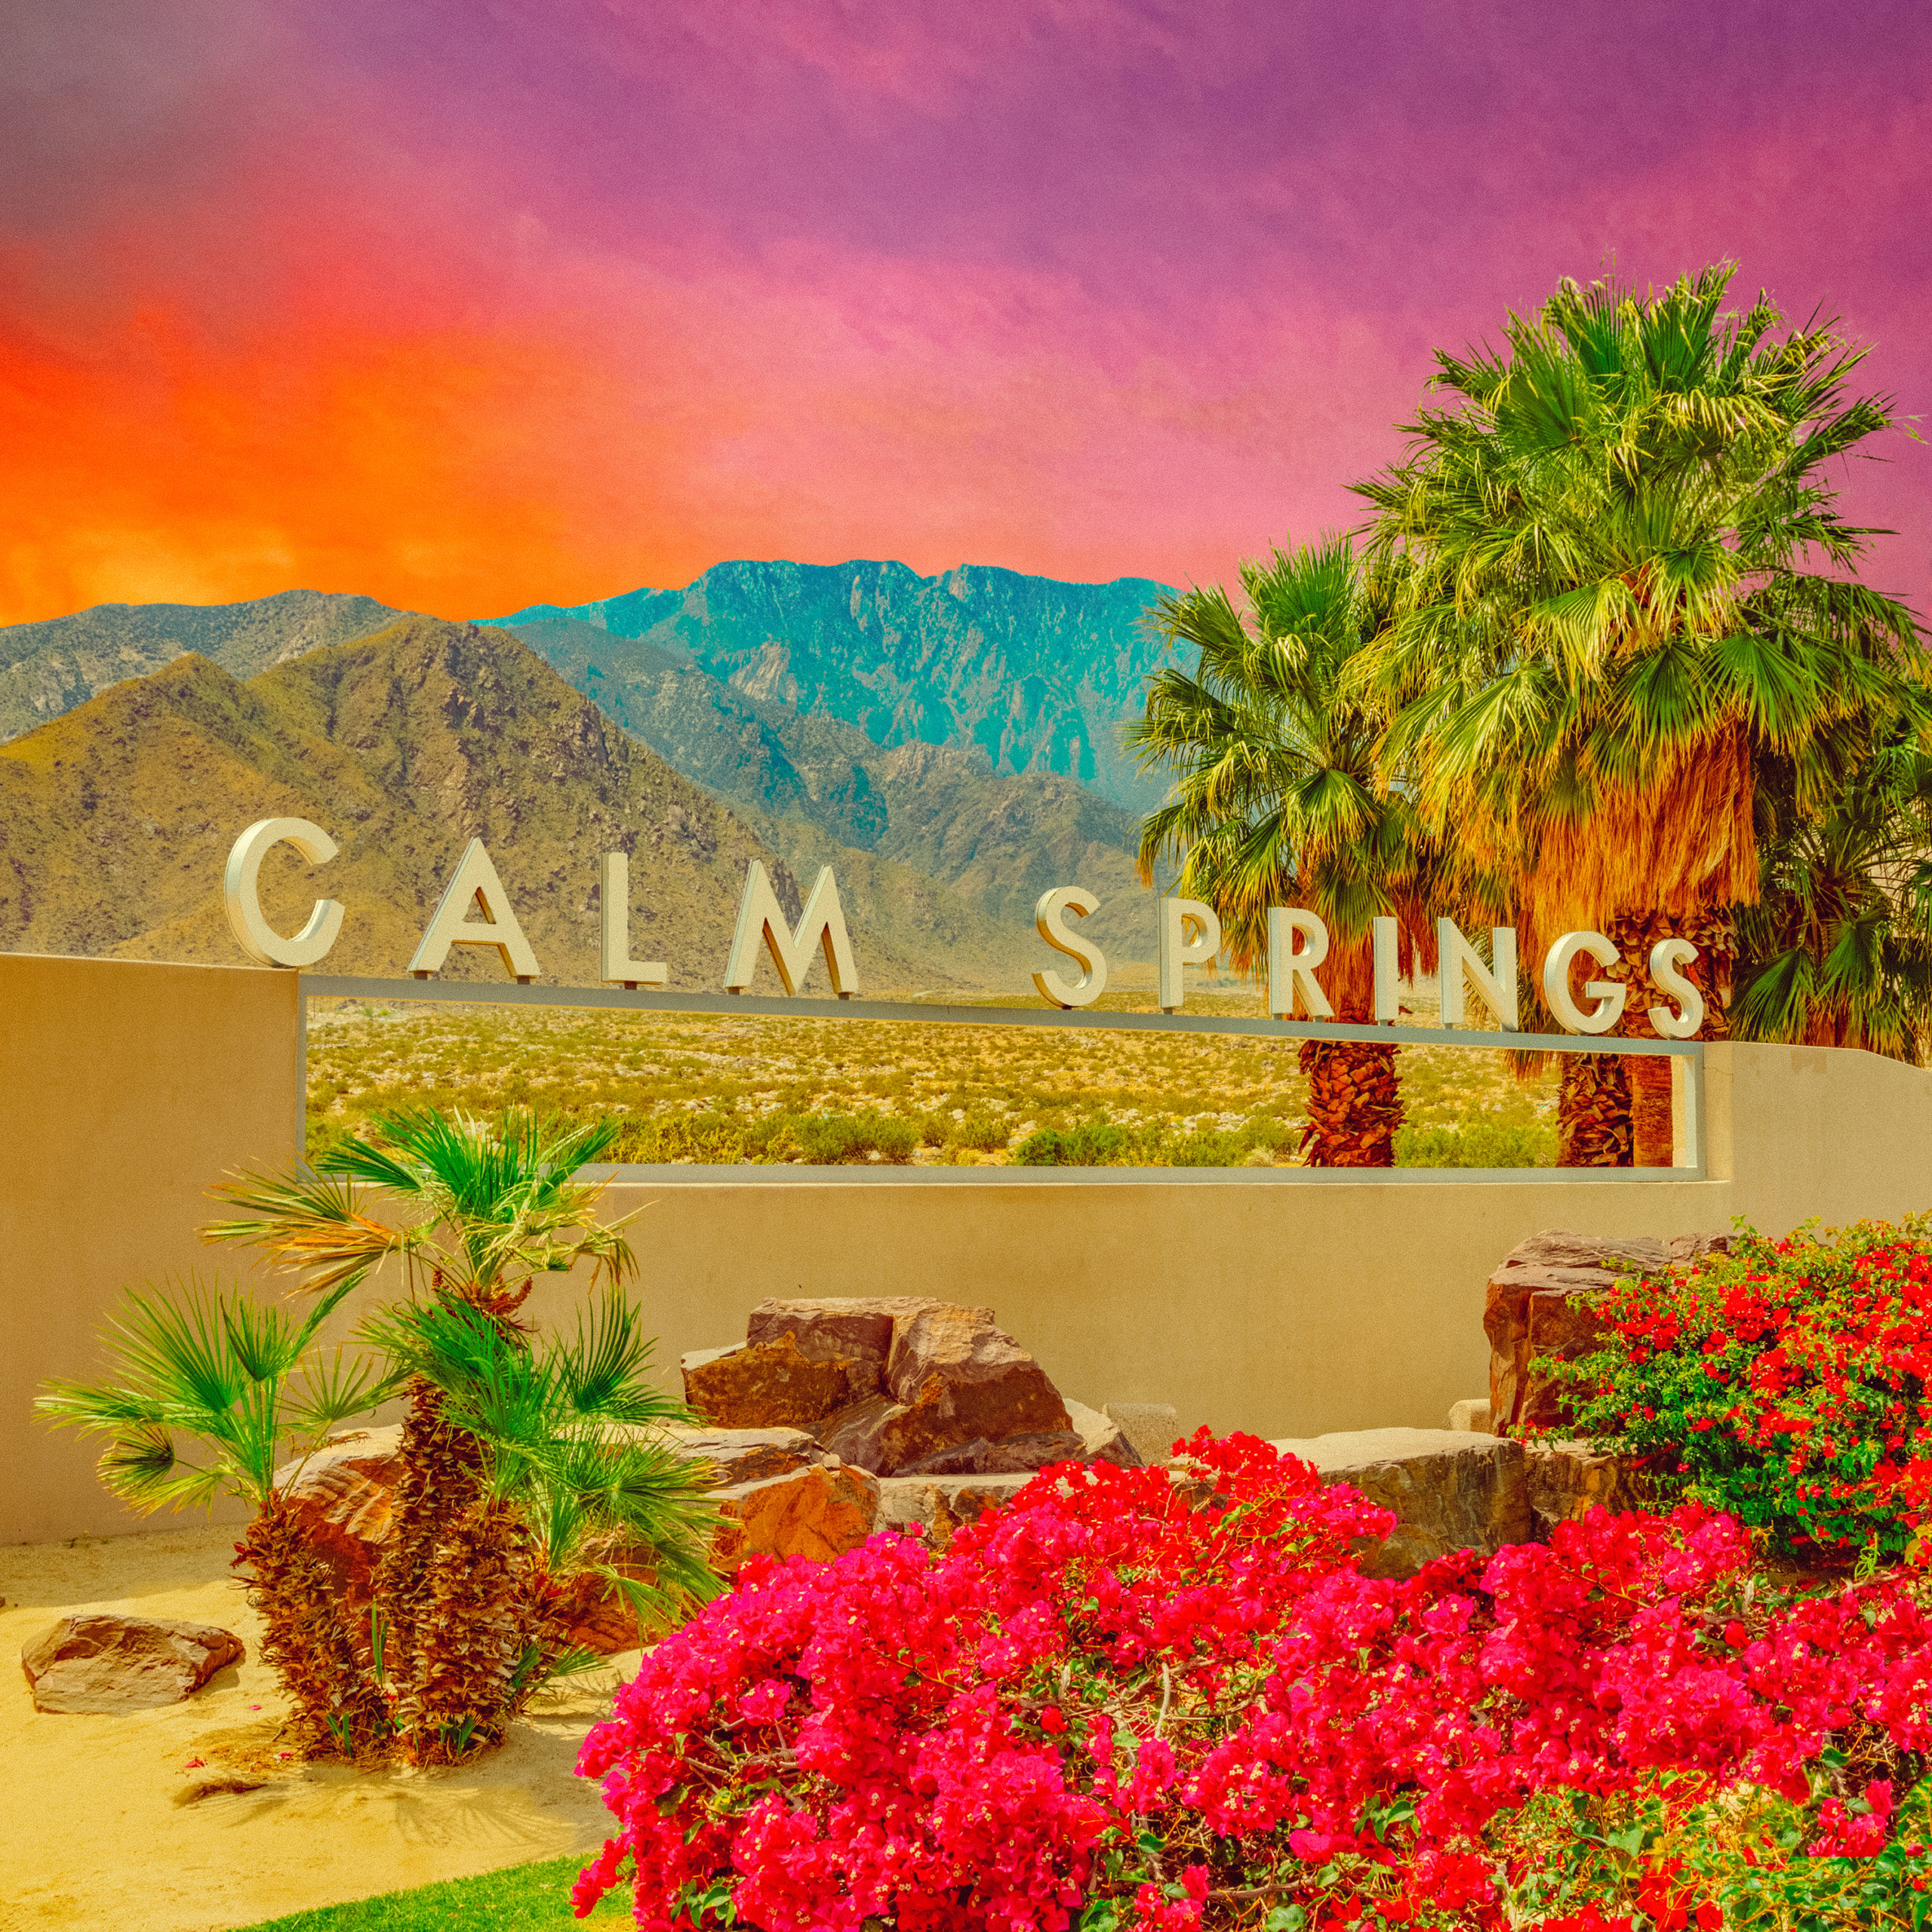 Bougainvillea and palm trees at sign in Palm Springs, California